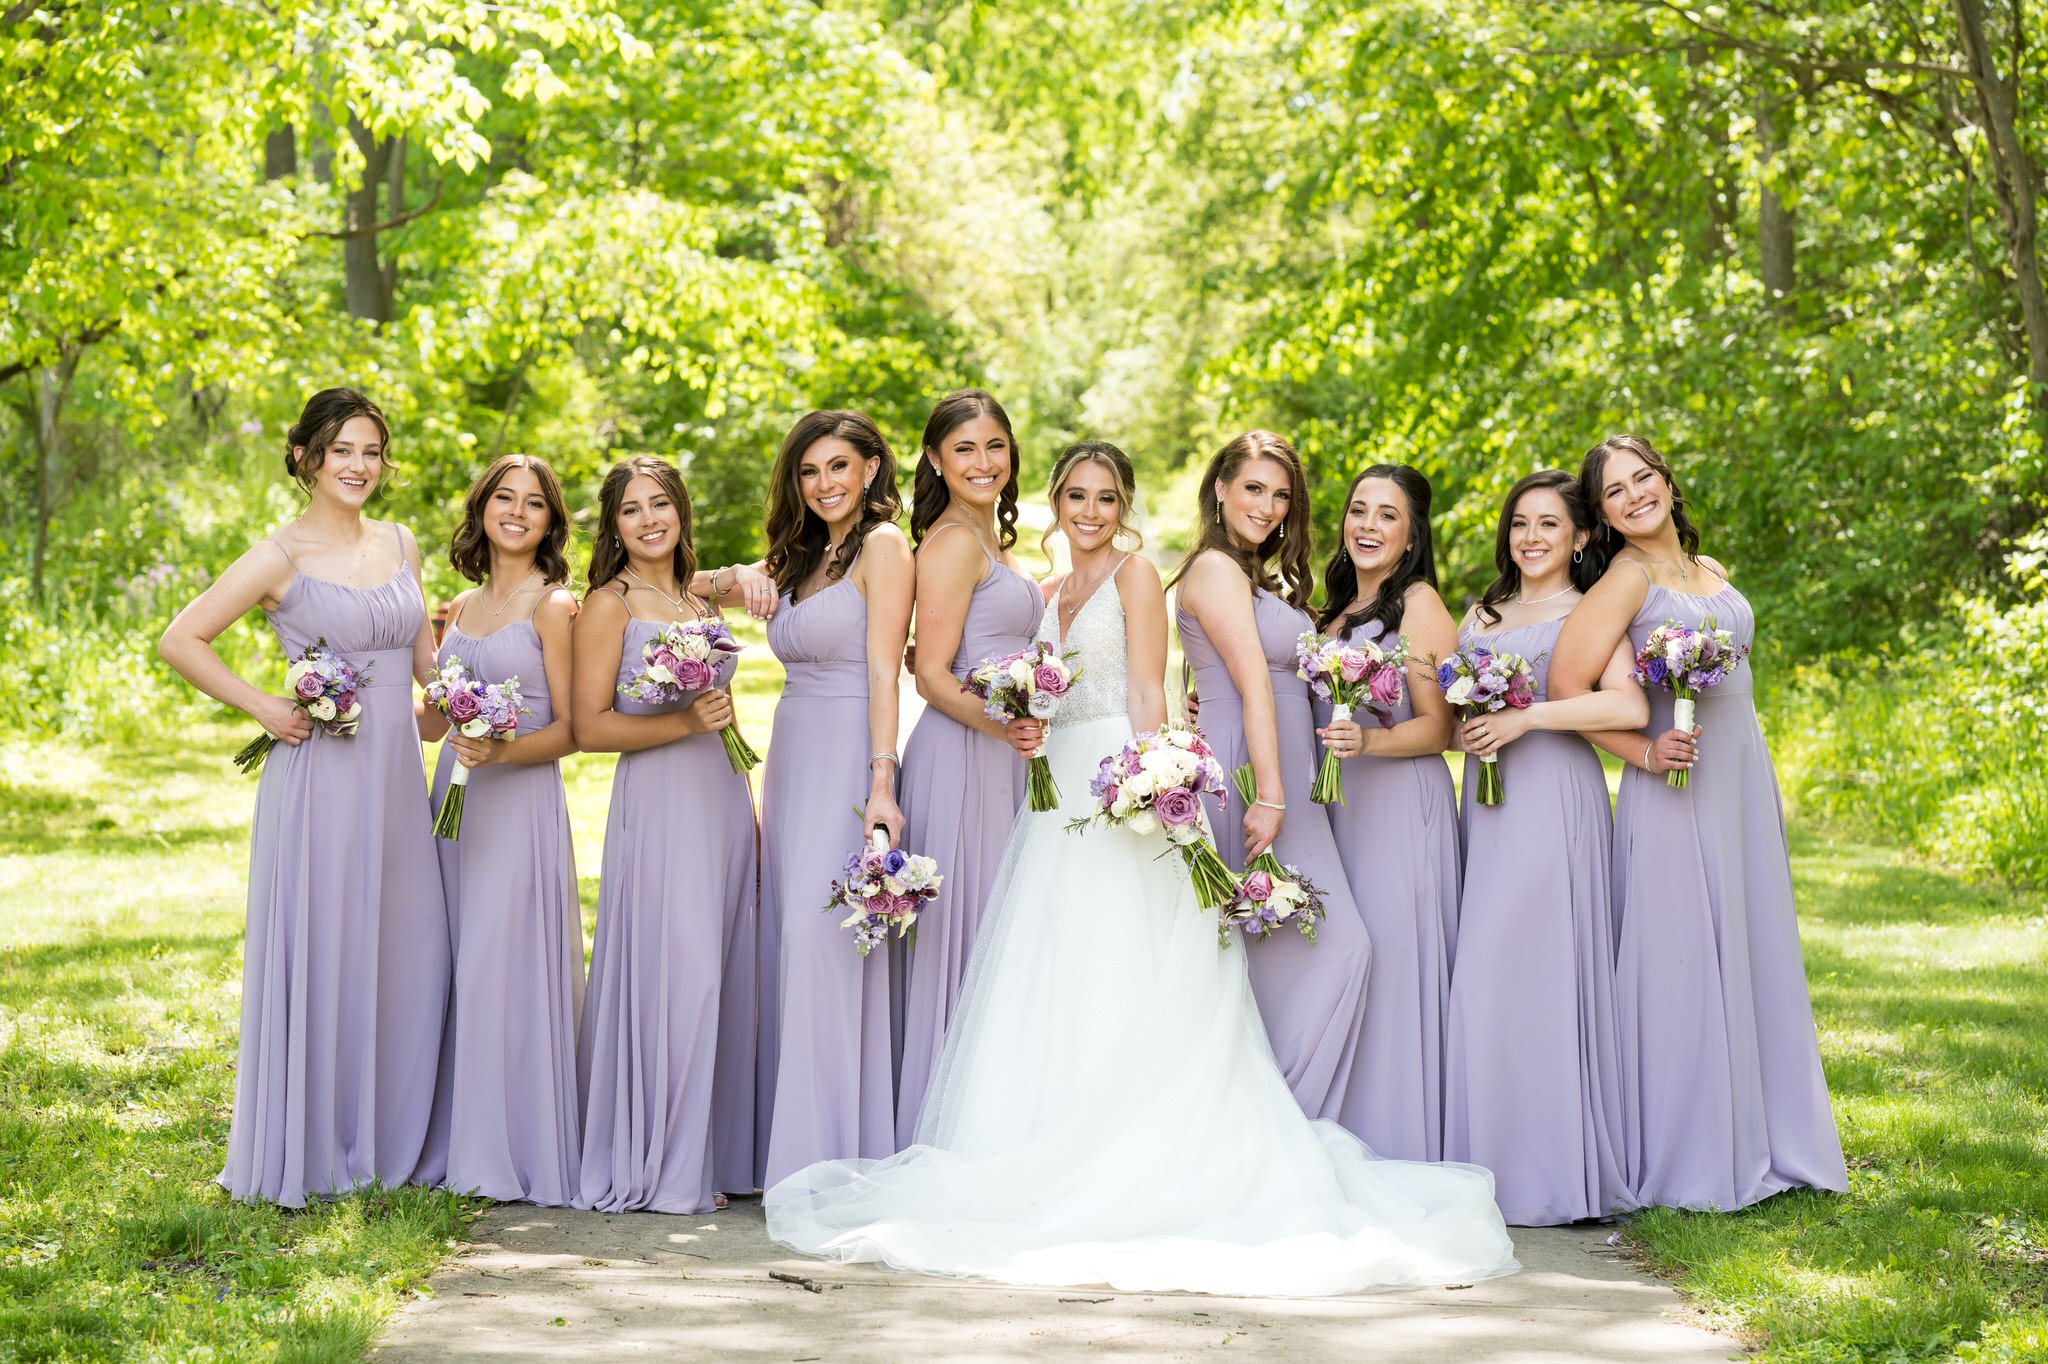 Wearing lavender colored dresses, bridesmaids pose for a picture at Van Hoosen Museum. 